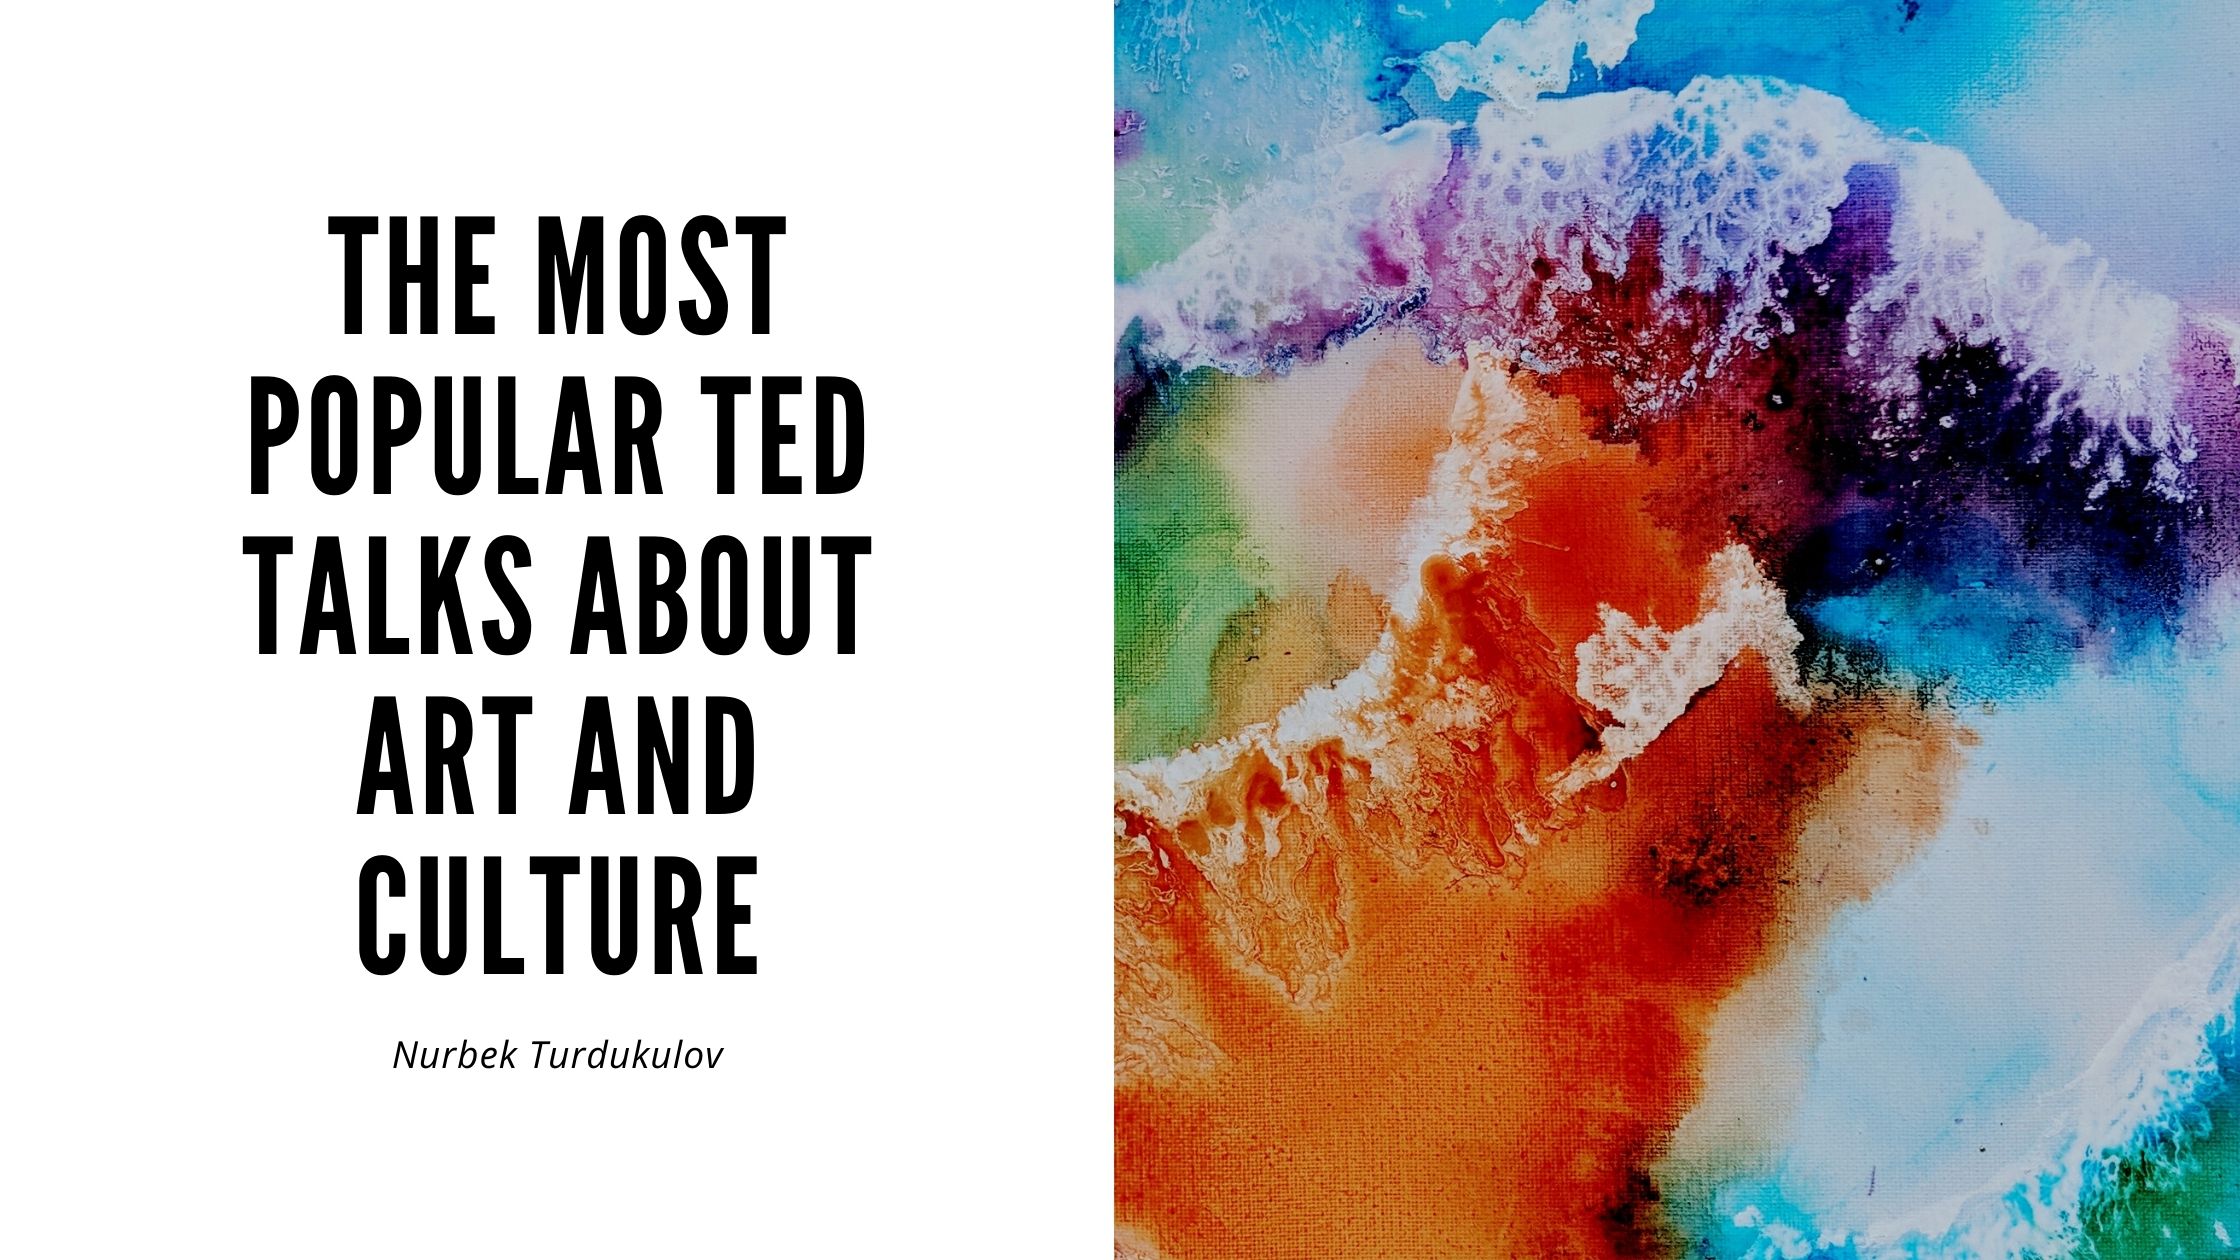 The Most Popular TED Talks about Art and Culture